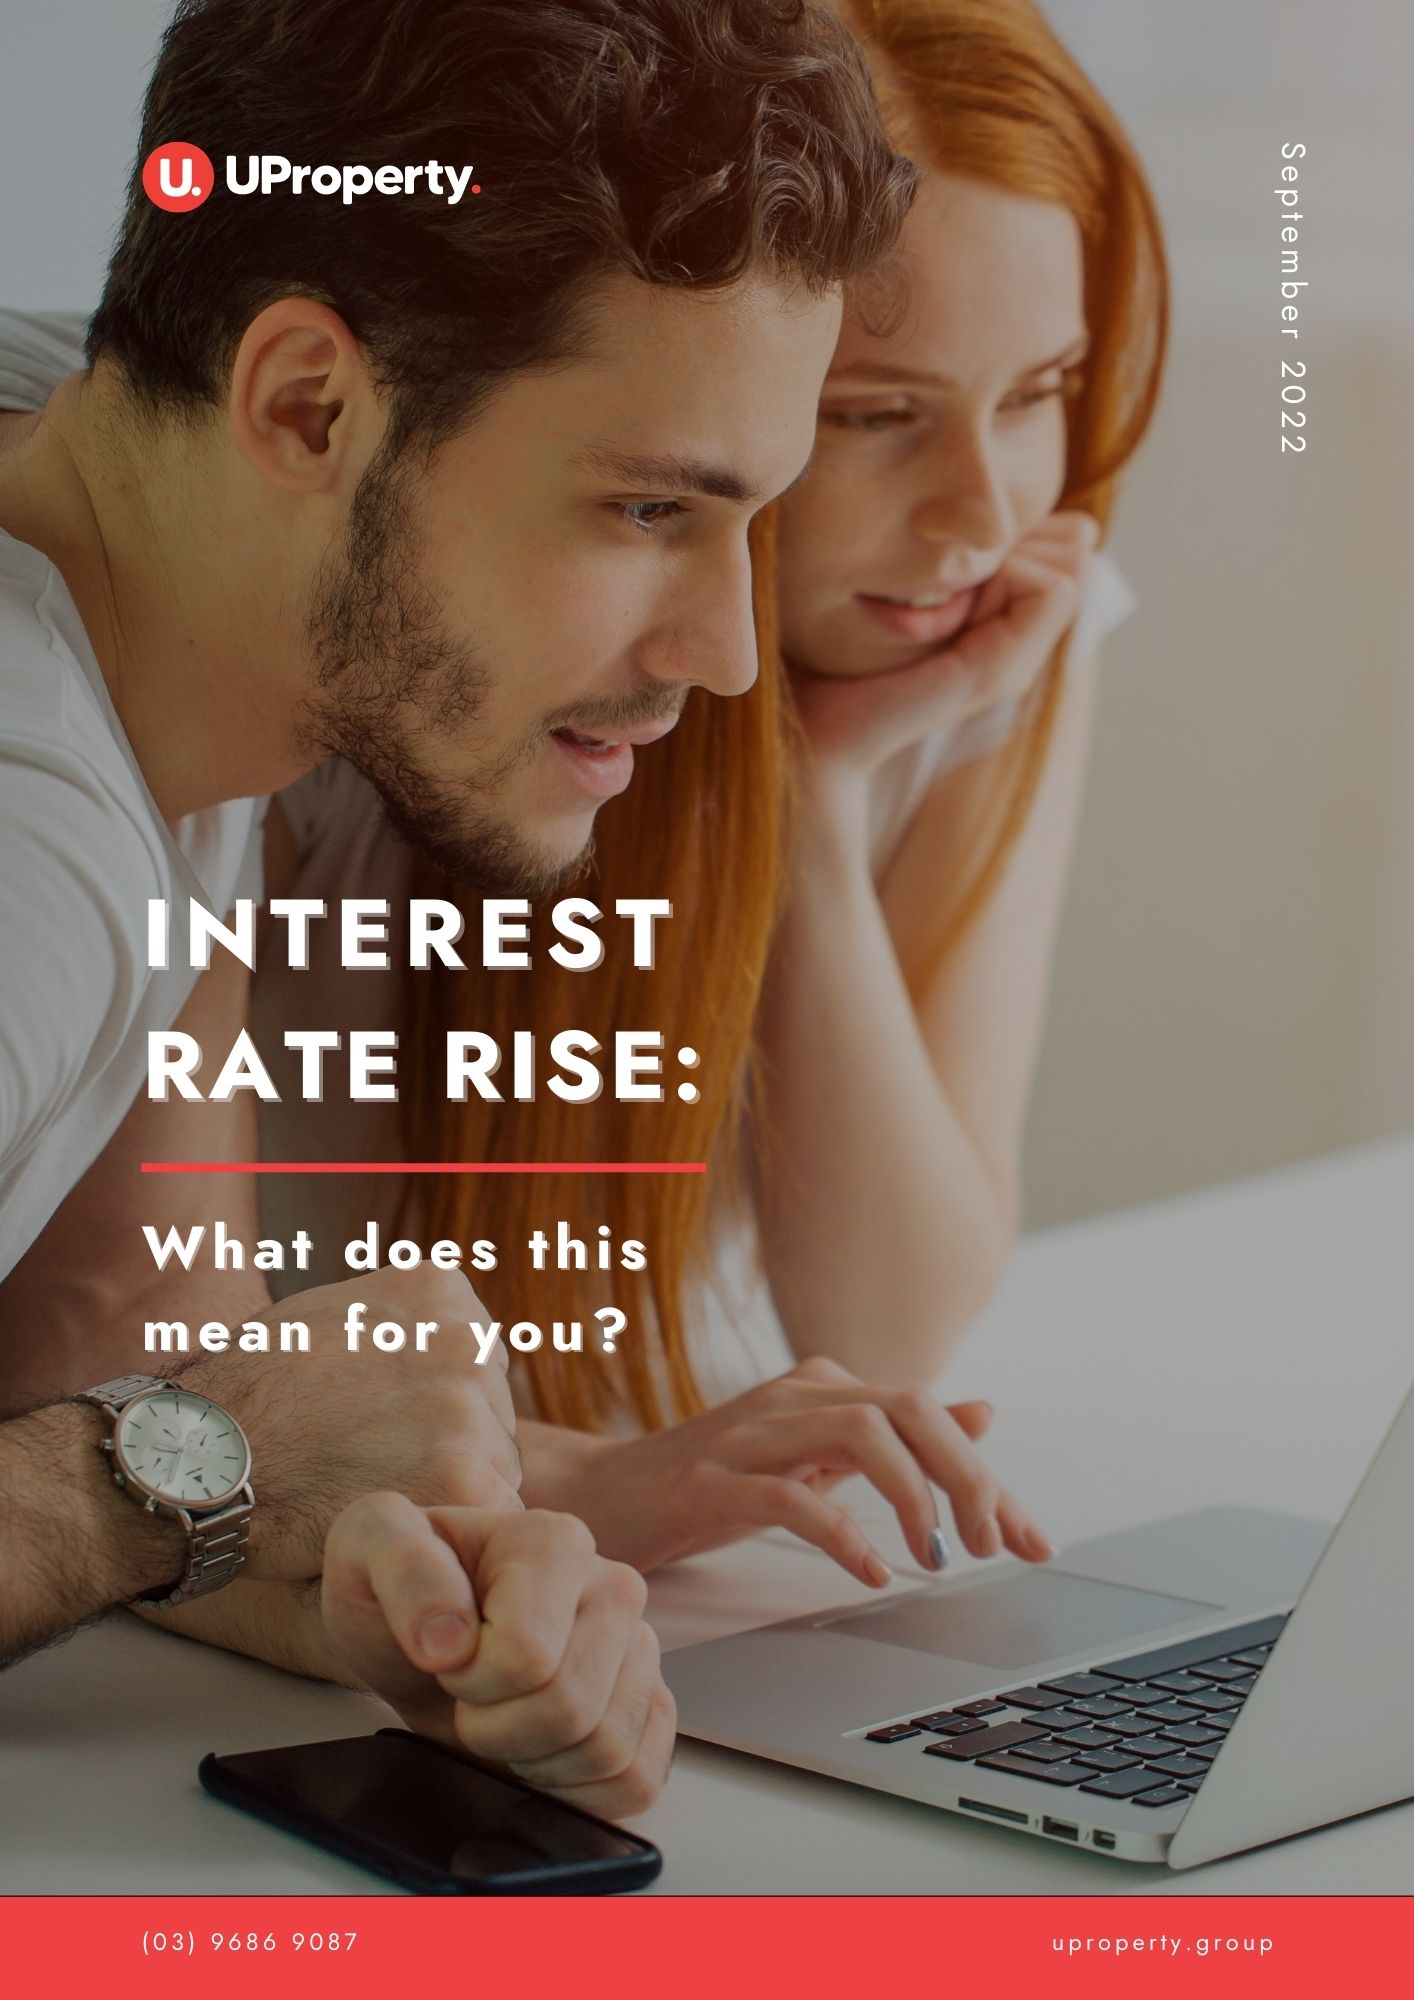 UProperty: Interest rate rise guide